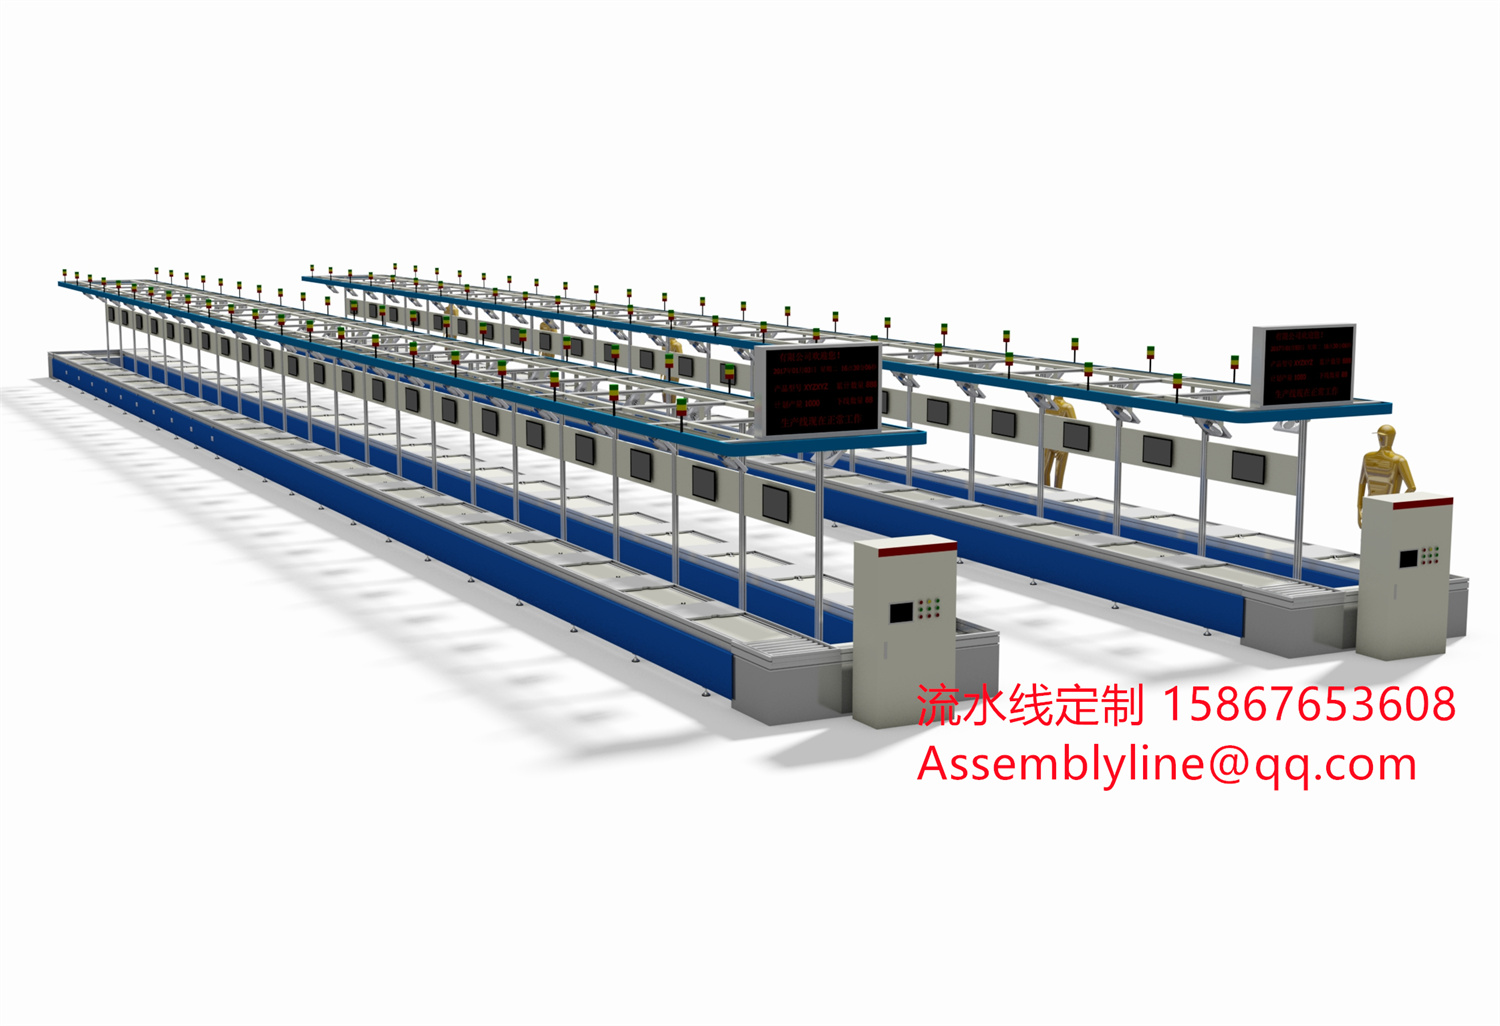 Double-speed chain assembly line conveyor